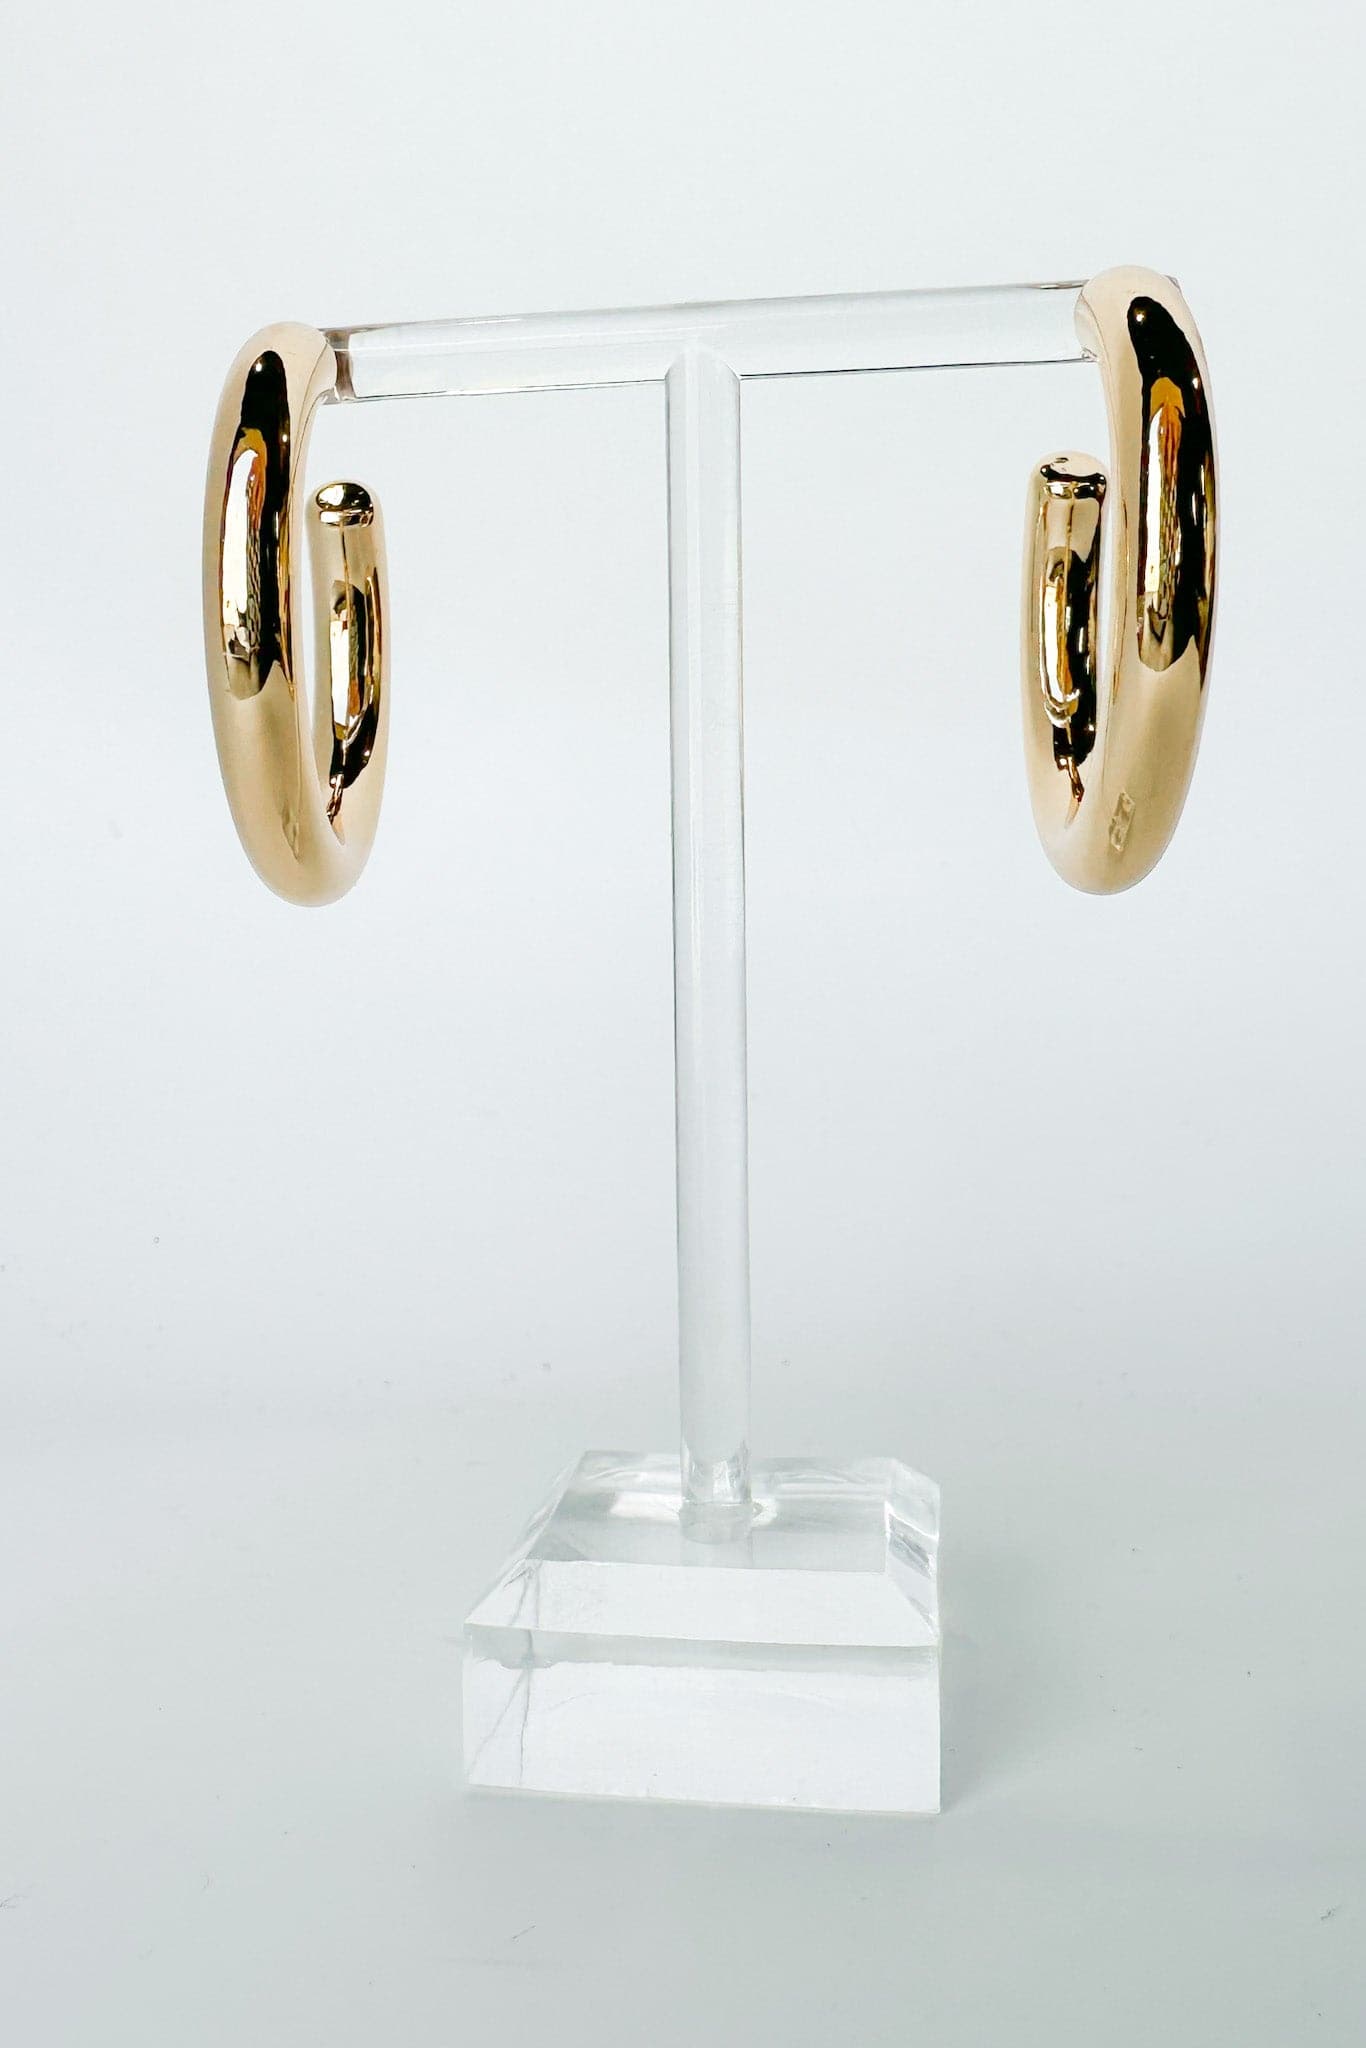  Iconic Entrance Chunky Hoop Earrings - BACK IN STOCK - Madison and Mallory